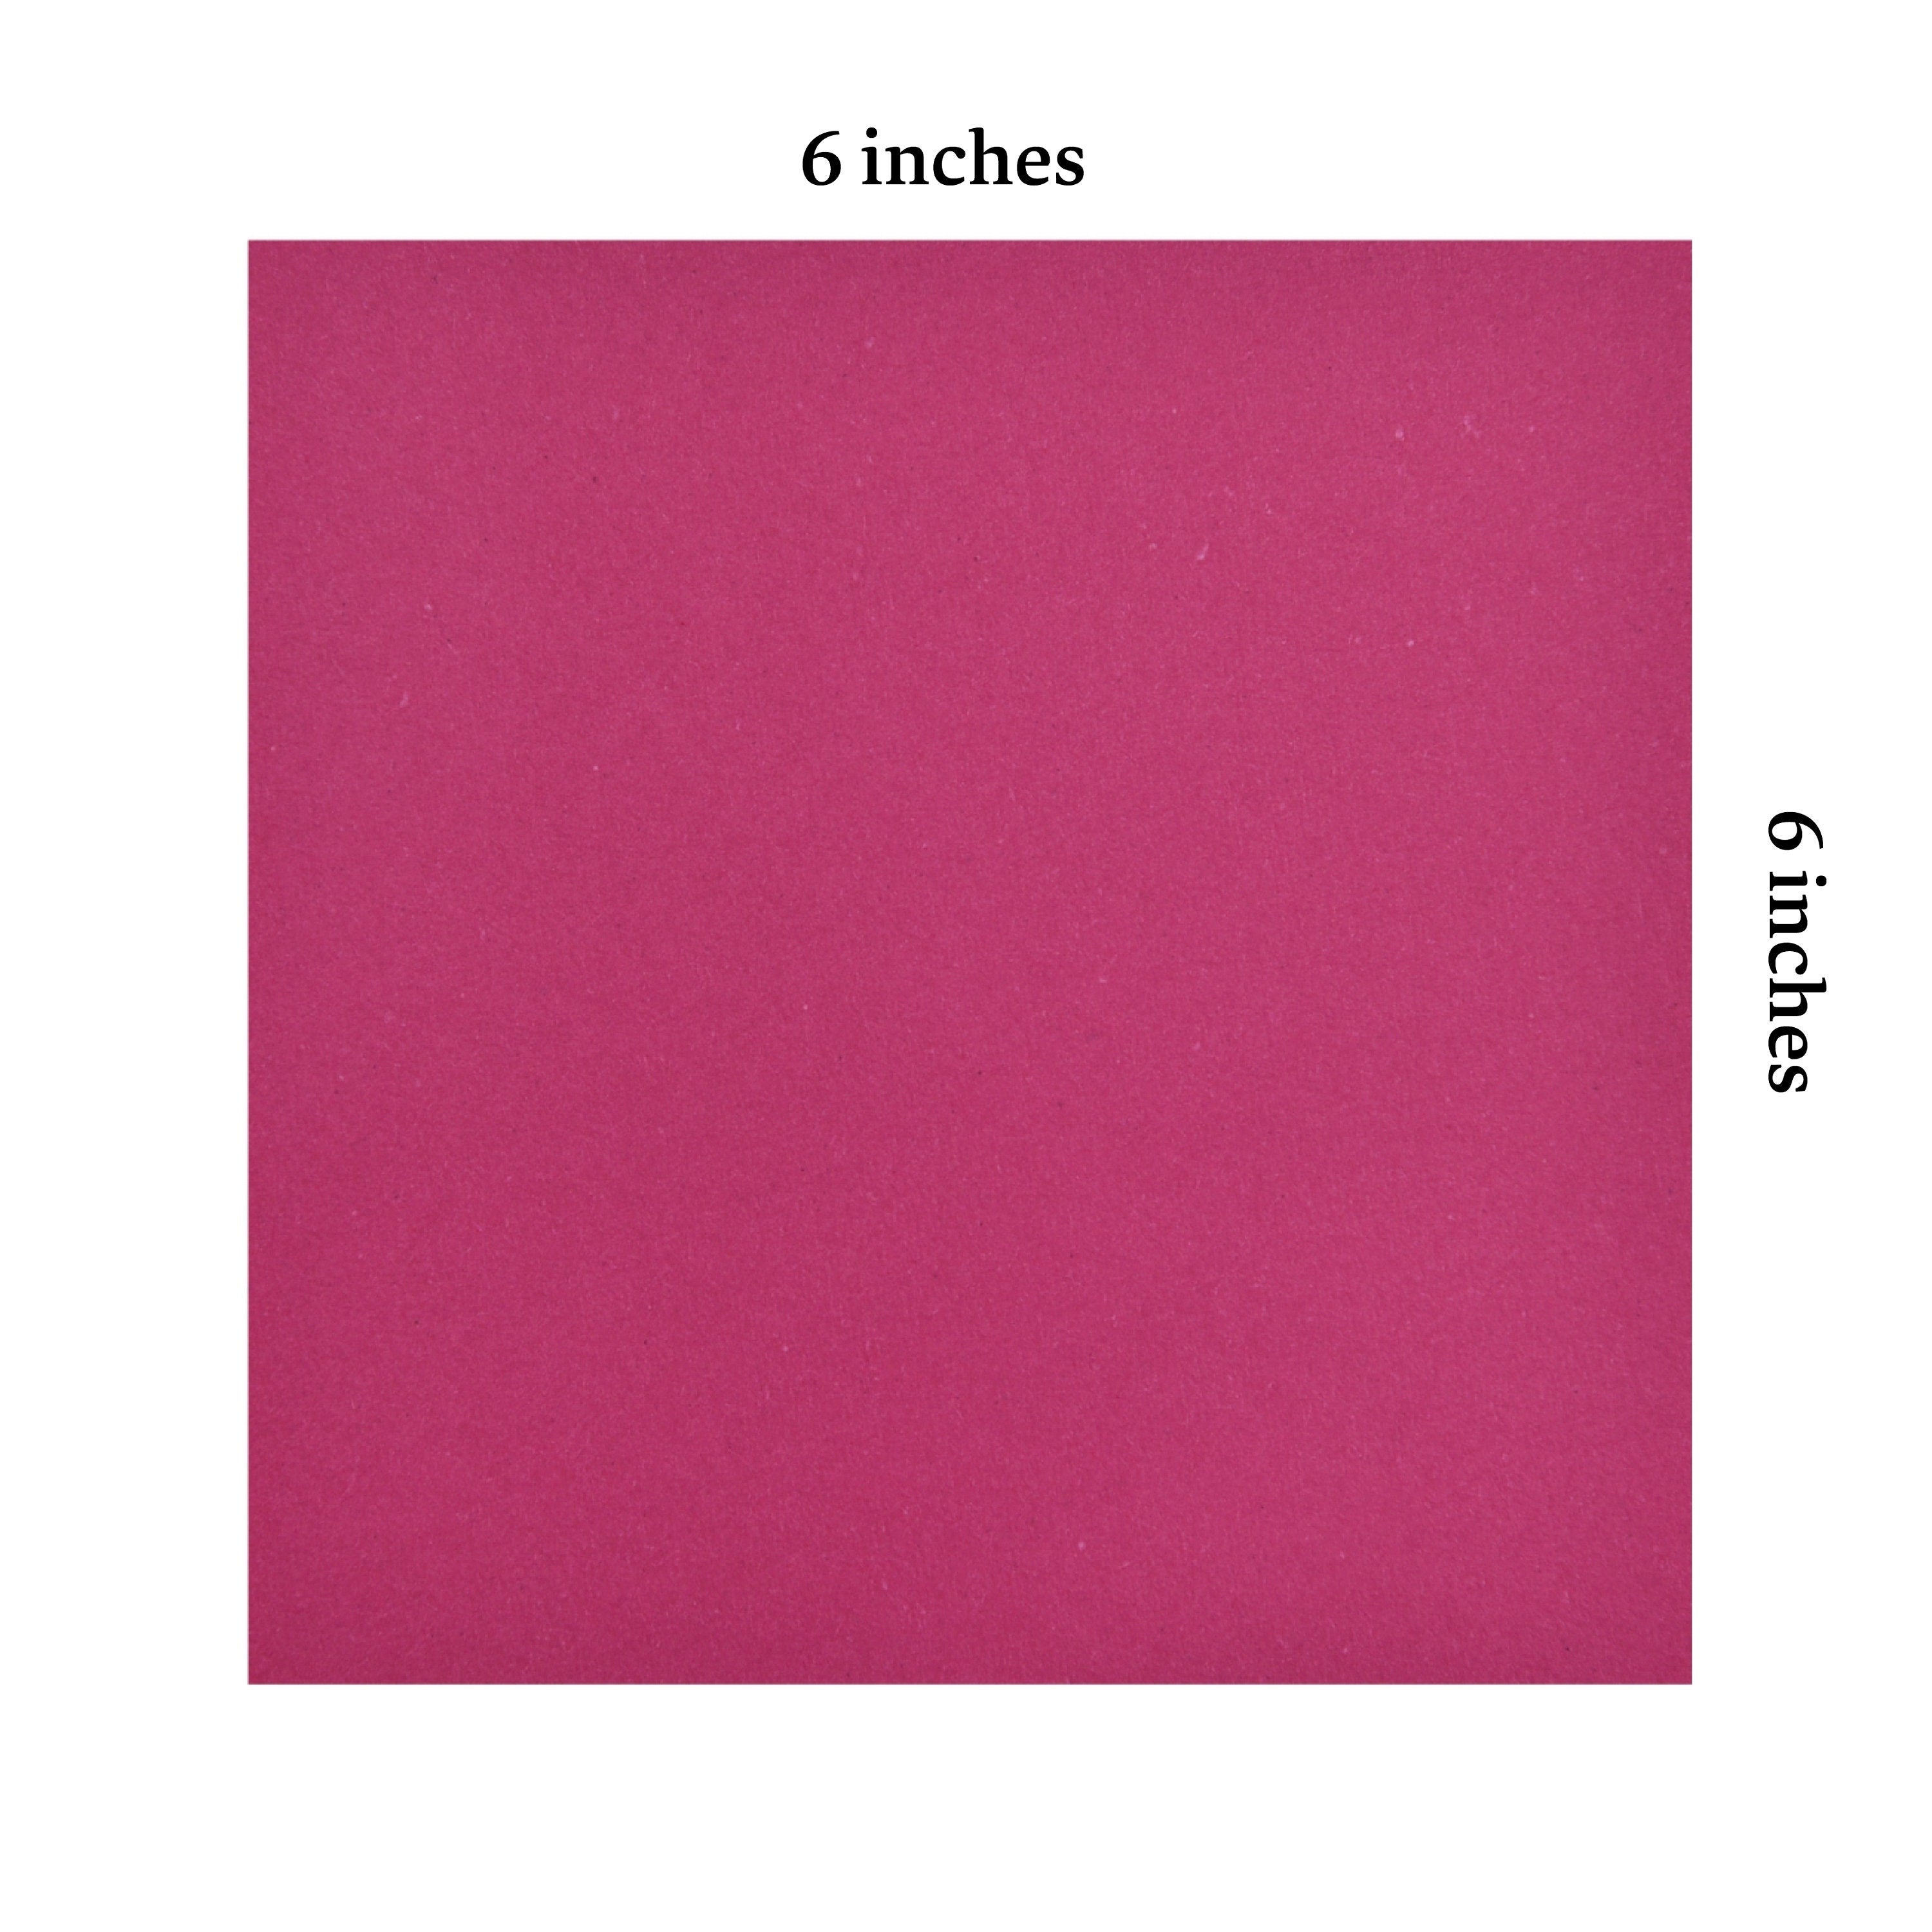 100 Origami Paper Sheets 6x6 inches Square Paper Pack S14